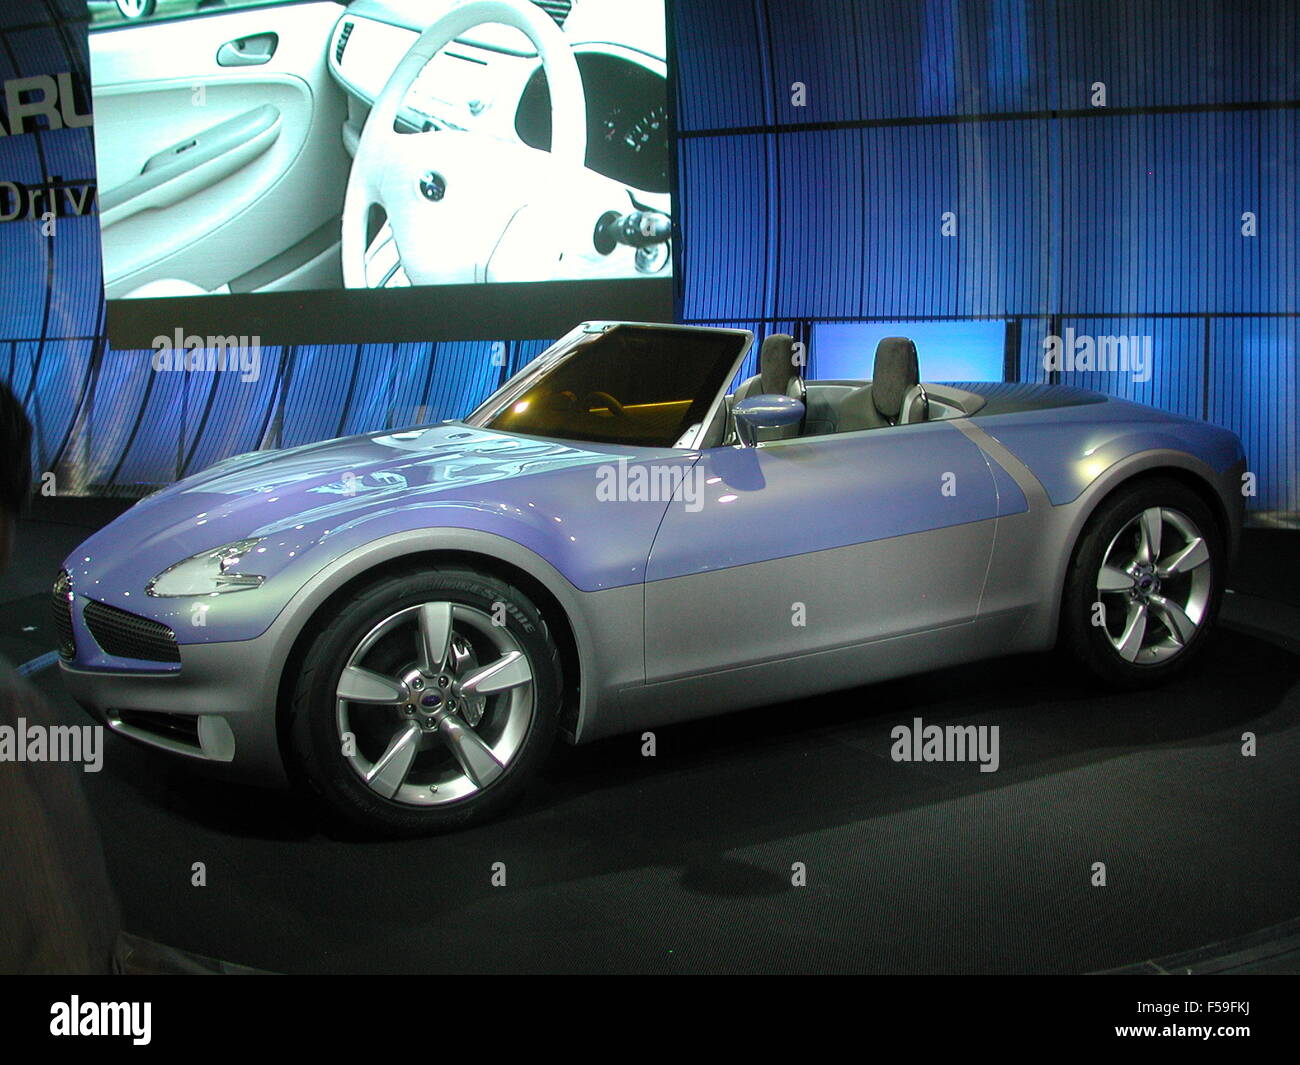 Subaru B9 Scrambler concept car shown at the 2003 motorshow in tokyo designed by Andreas Zapatinas - showing side view with open roof Stock Photo